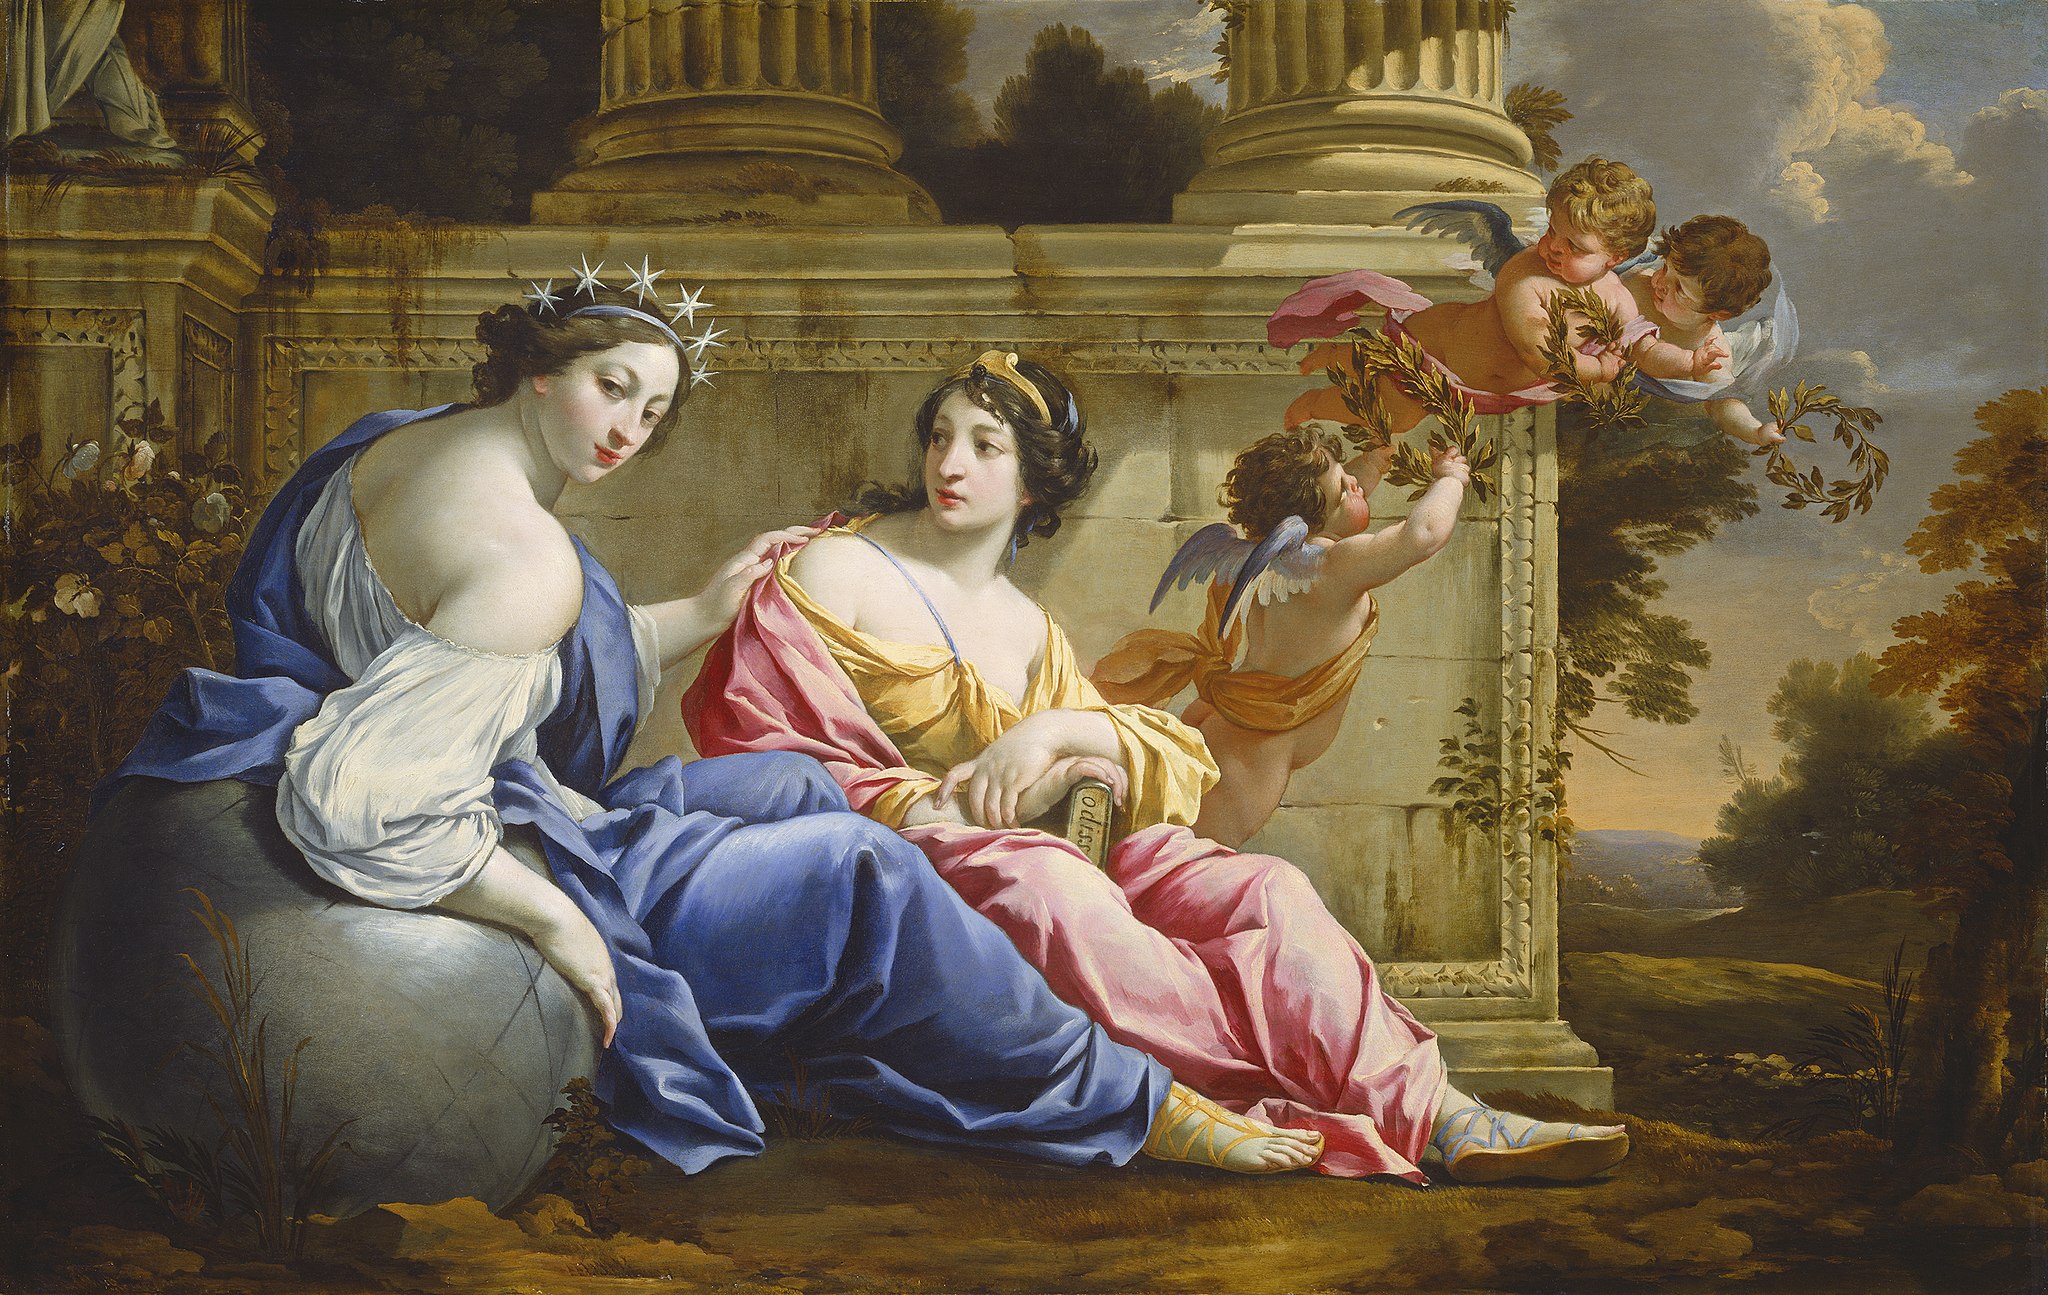 A painting women and cherubs. The women are disproportionately large compared to the cherubs. The women are seated (on the left) and the cherubs are flying (up in the right). The setting is in front a building with tall white pillars.